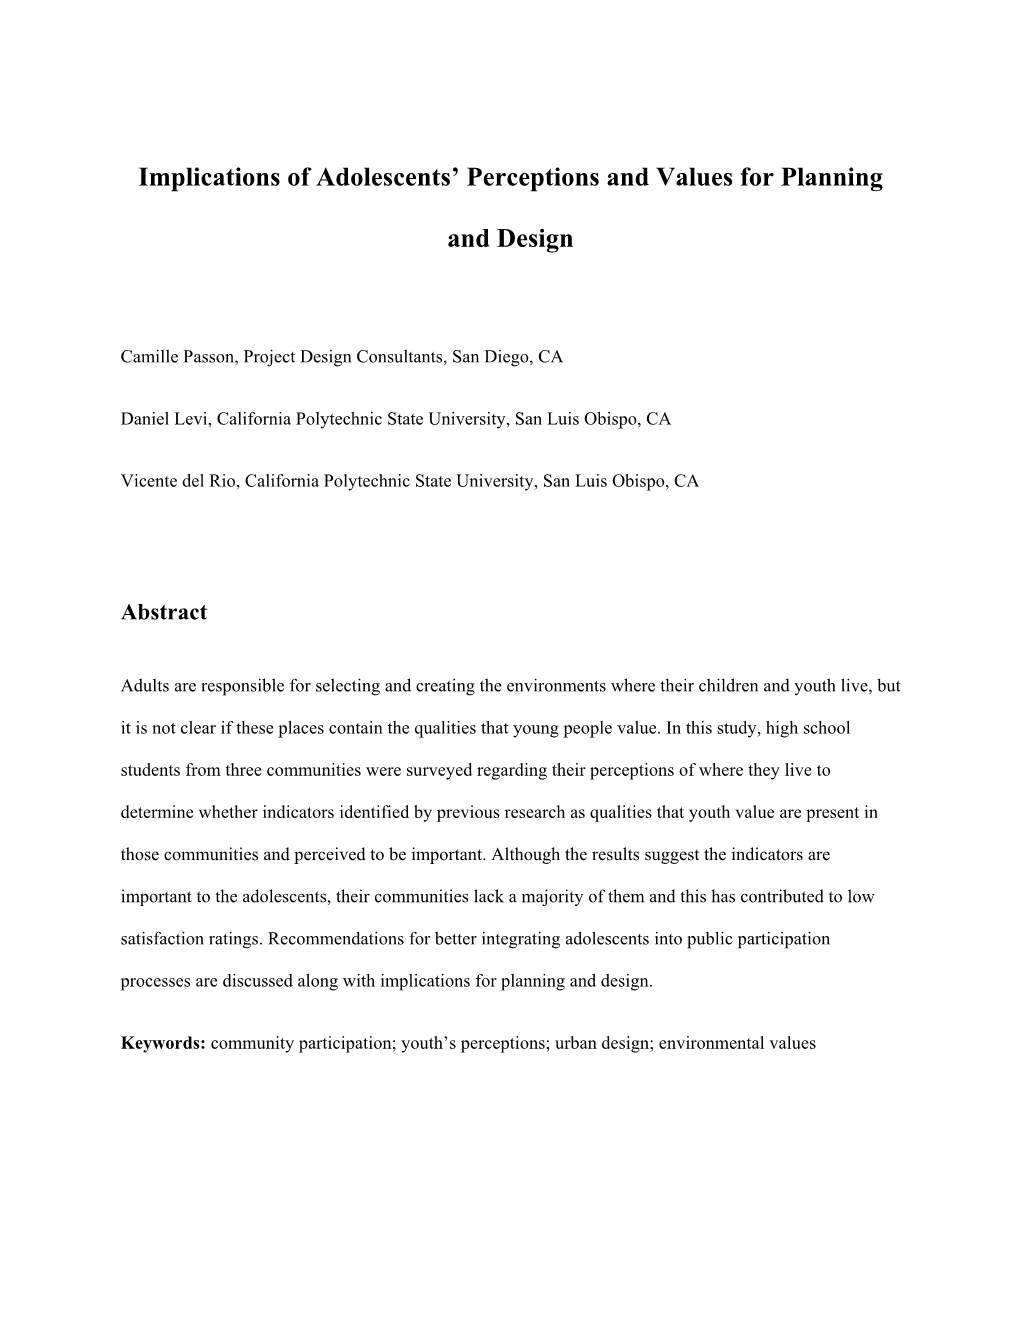 Implications of Adolescents' Perceptions and Values For